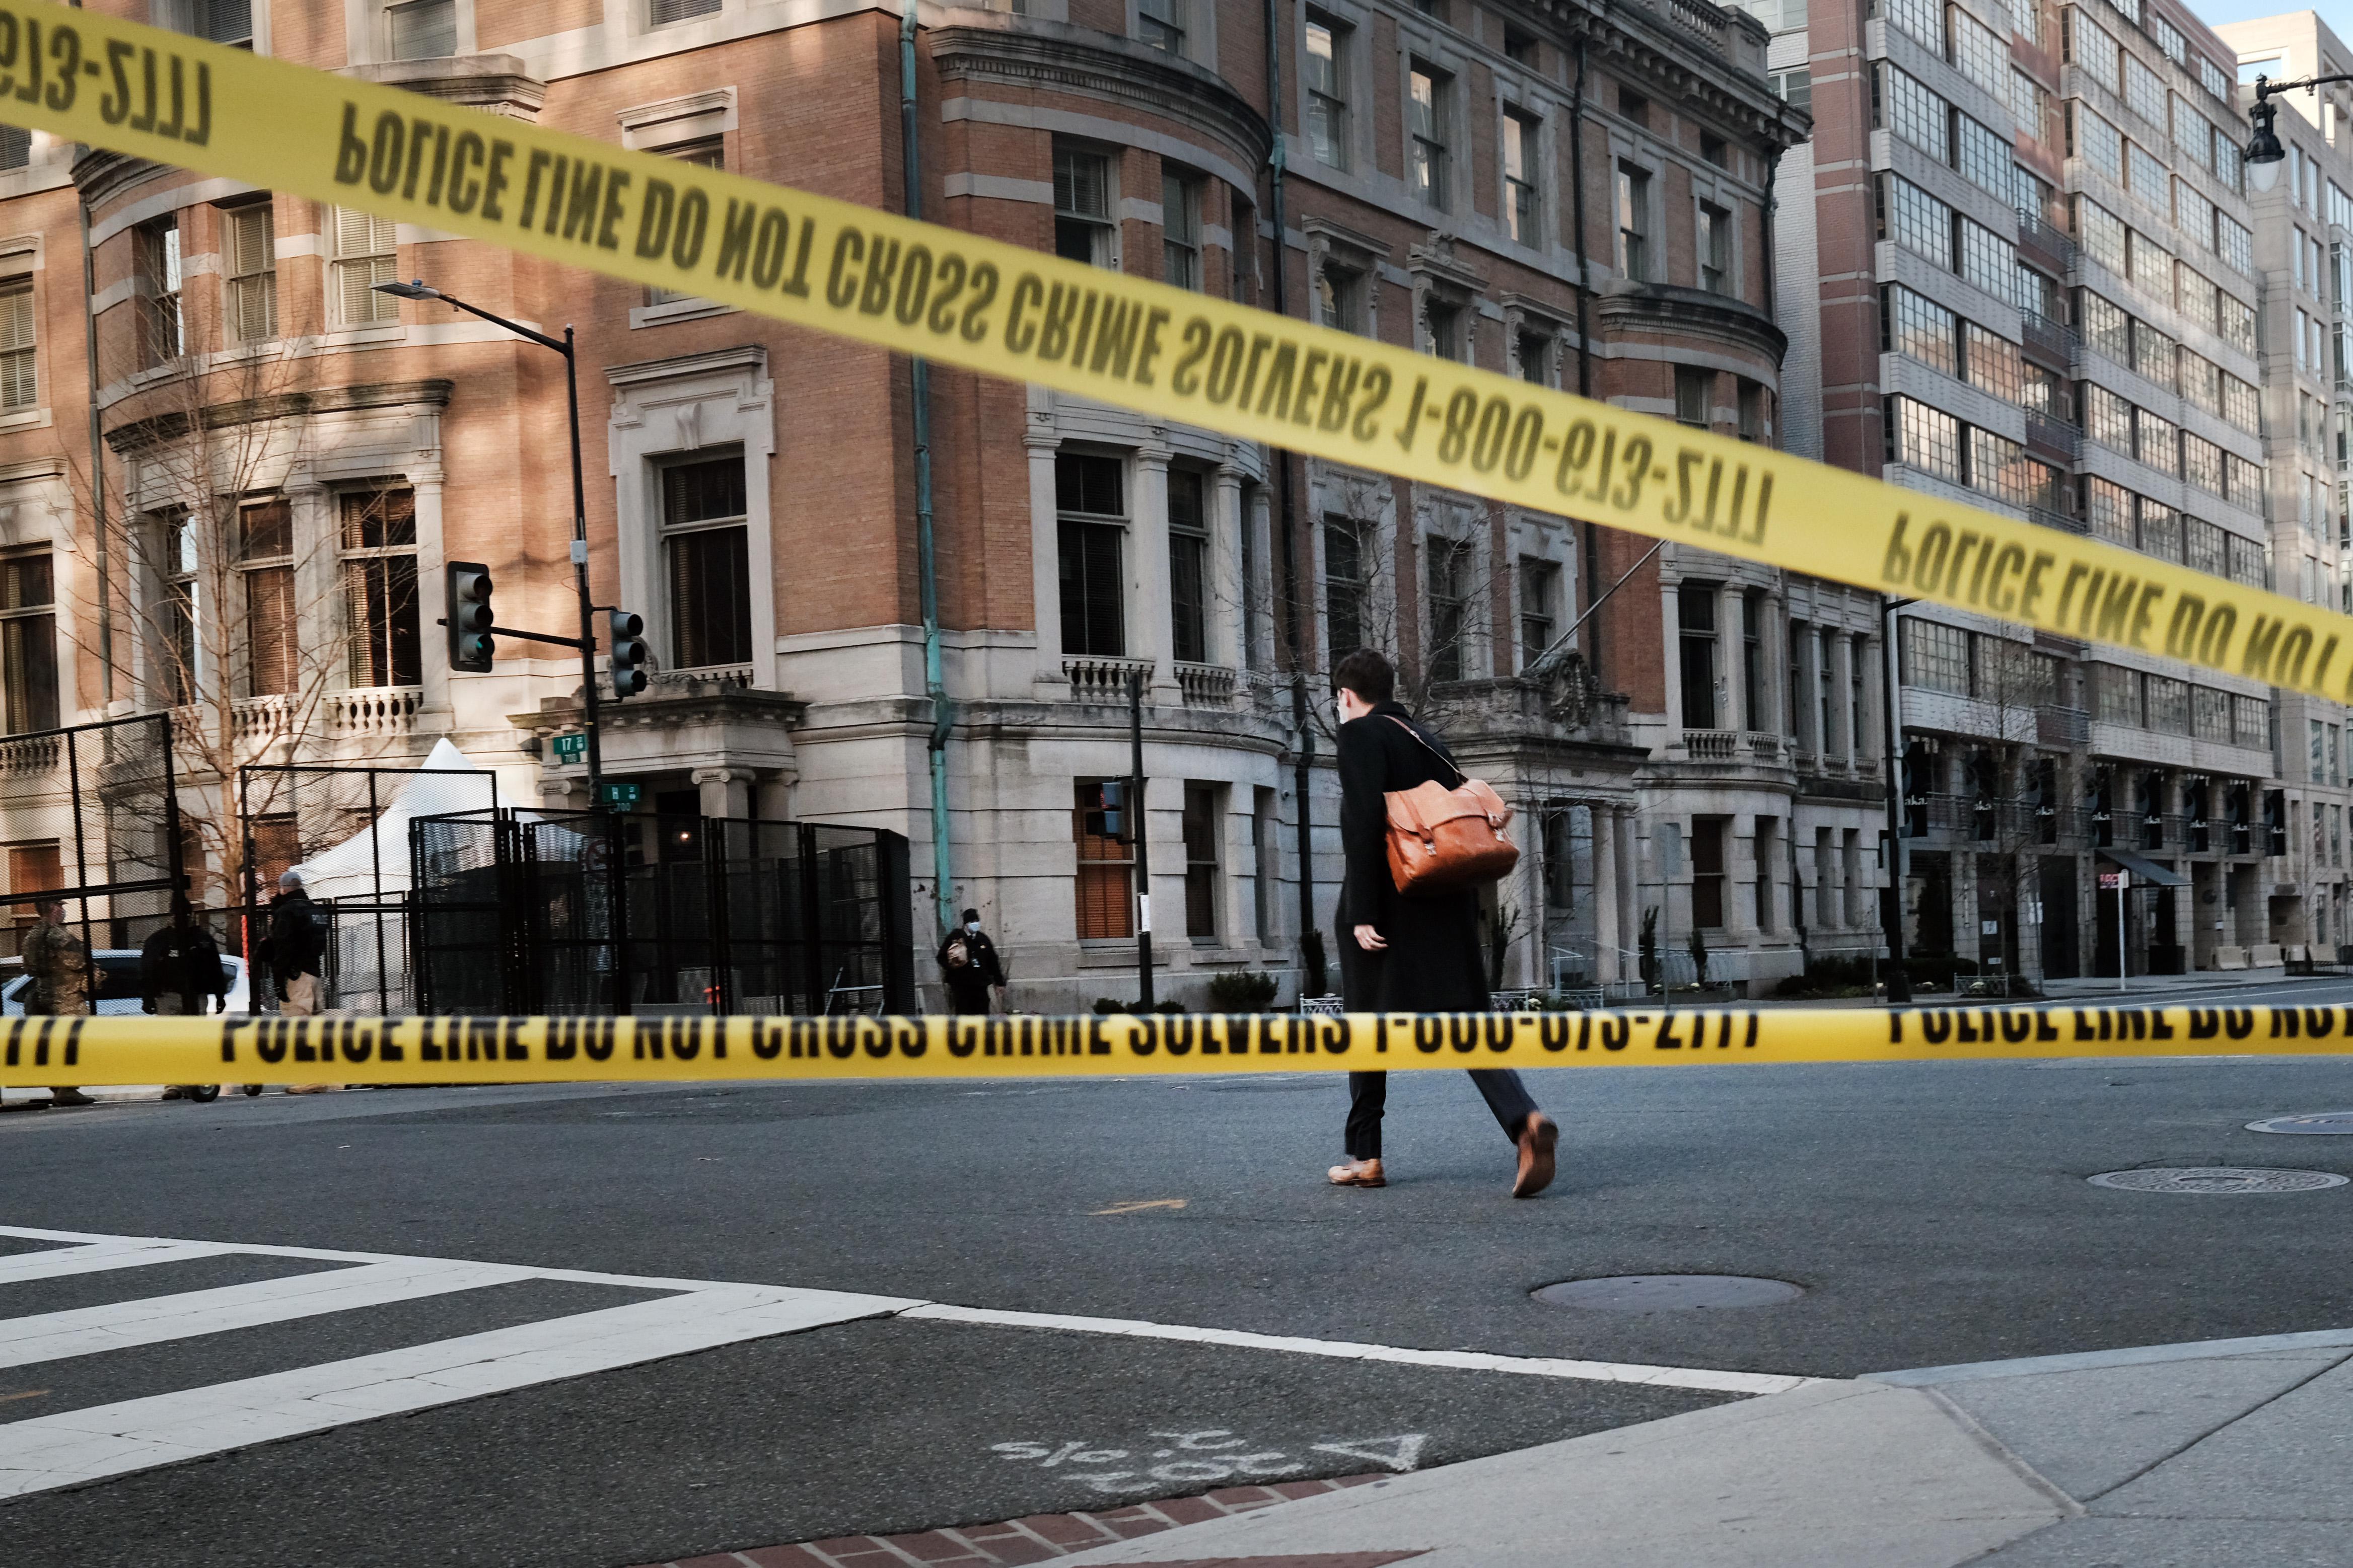 A person crosses an empty street closed off by crime scene tape.